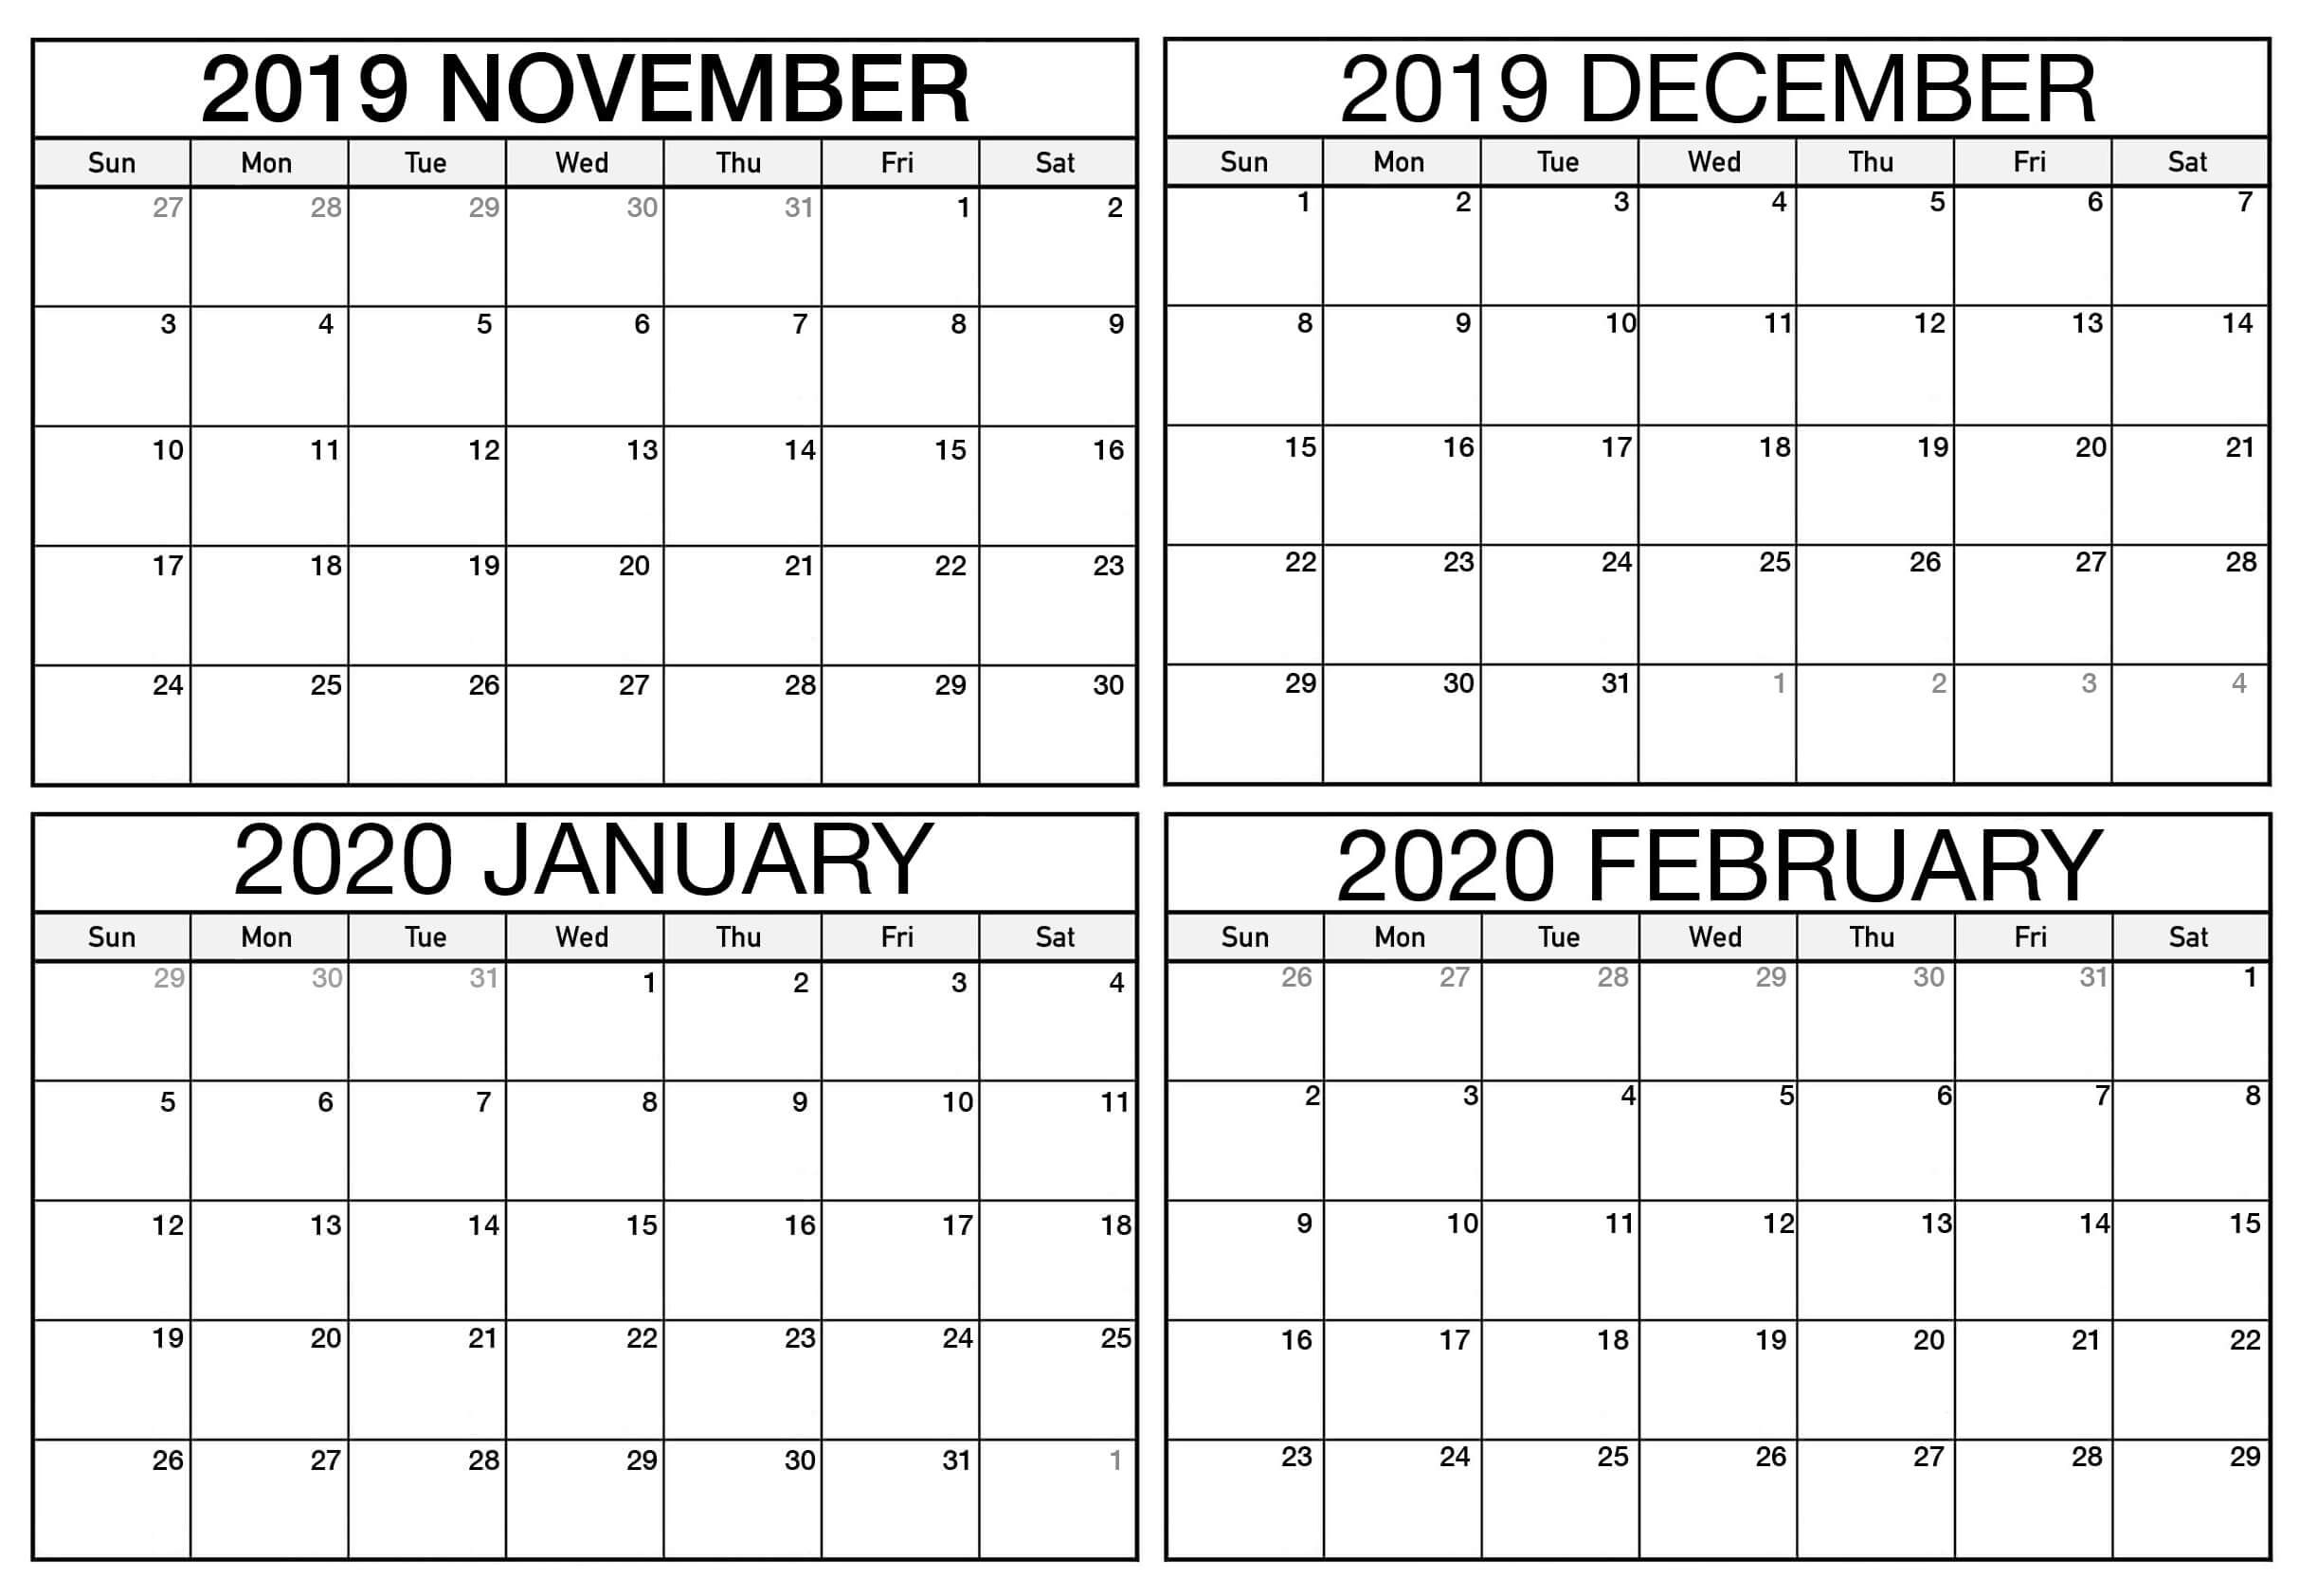 Blank November 2019 To February 2020 Calendar - 2019 Blank Four Month Calendar On One Page